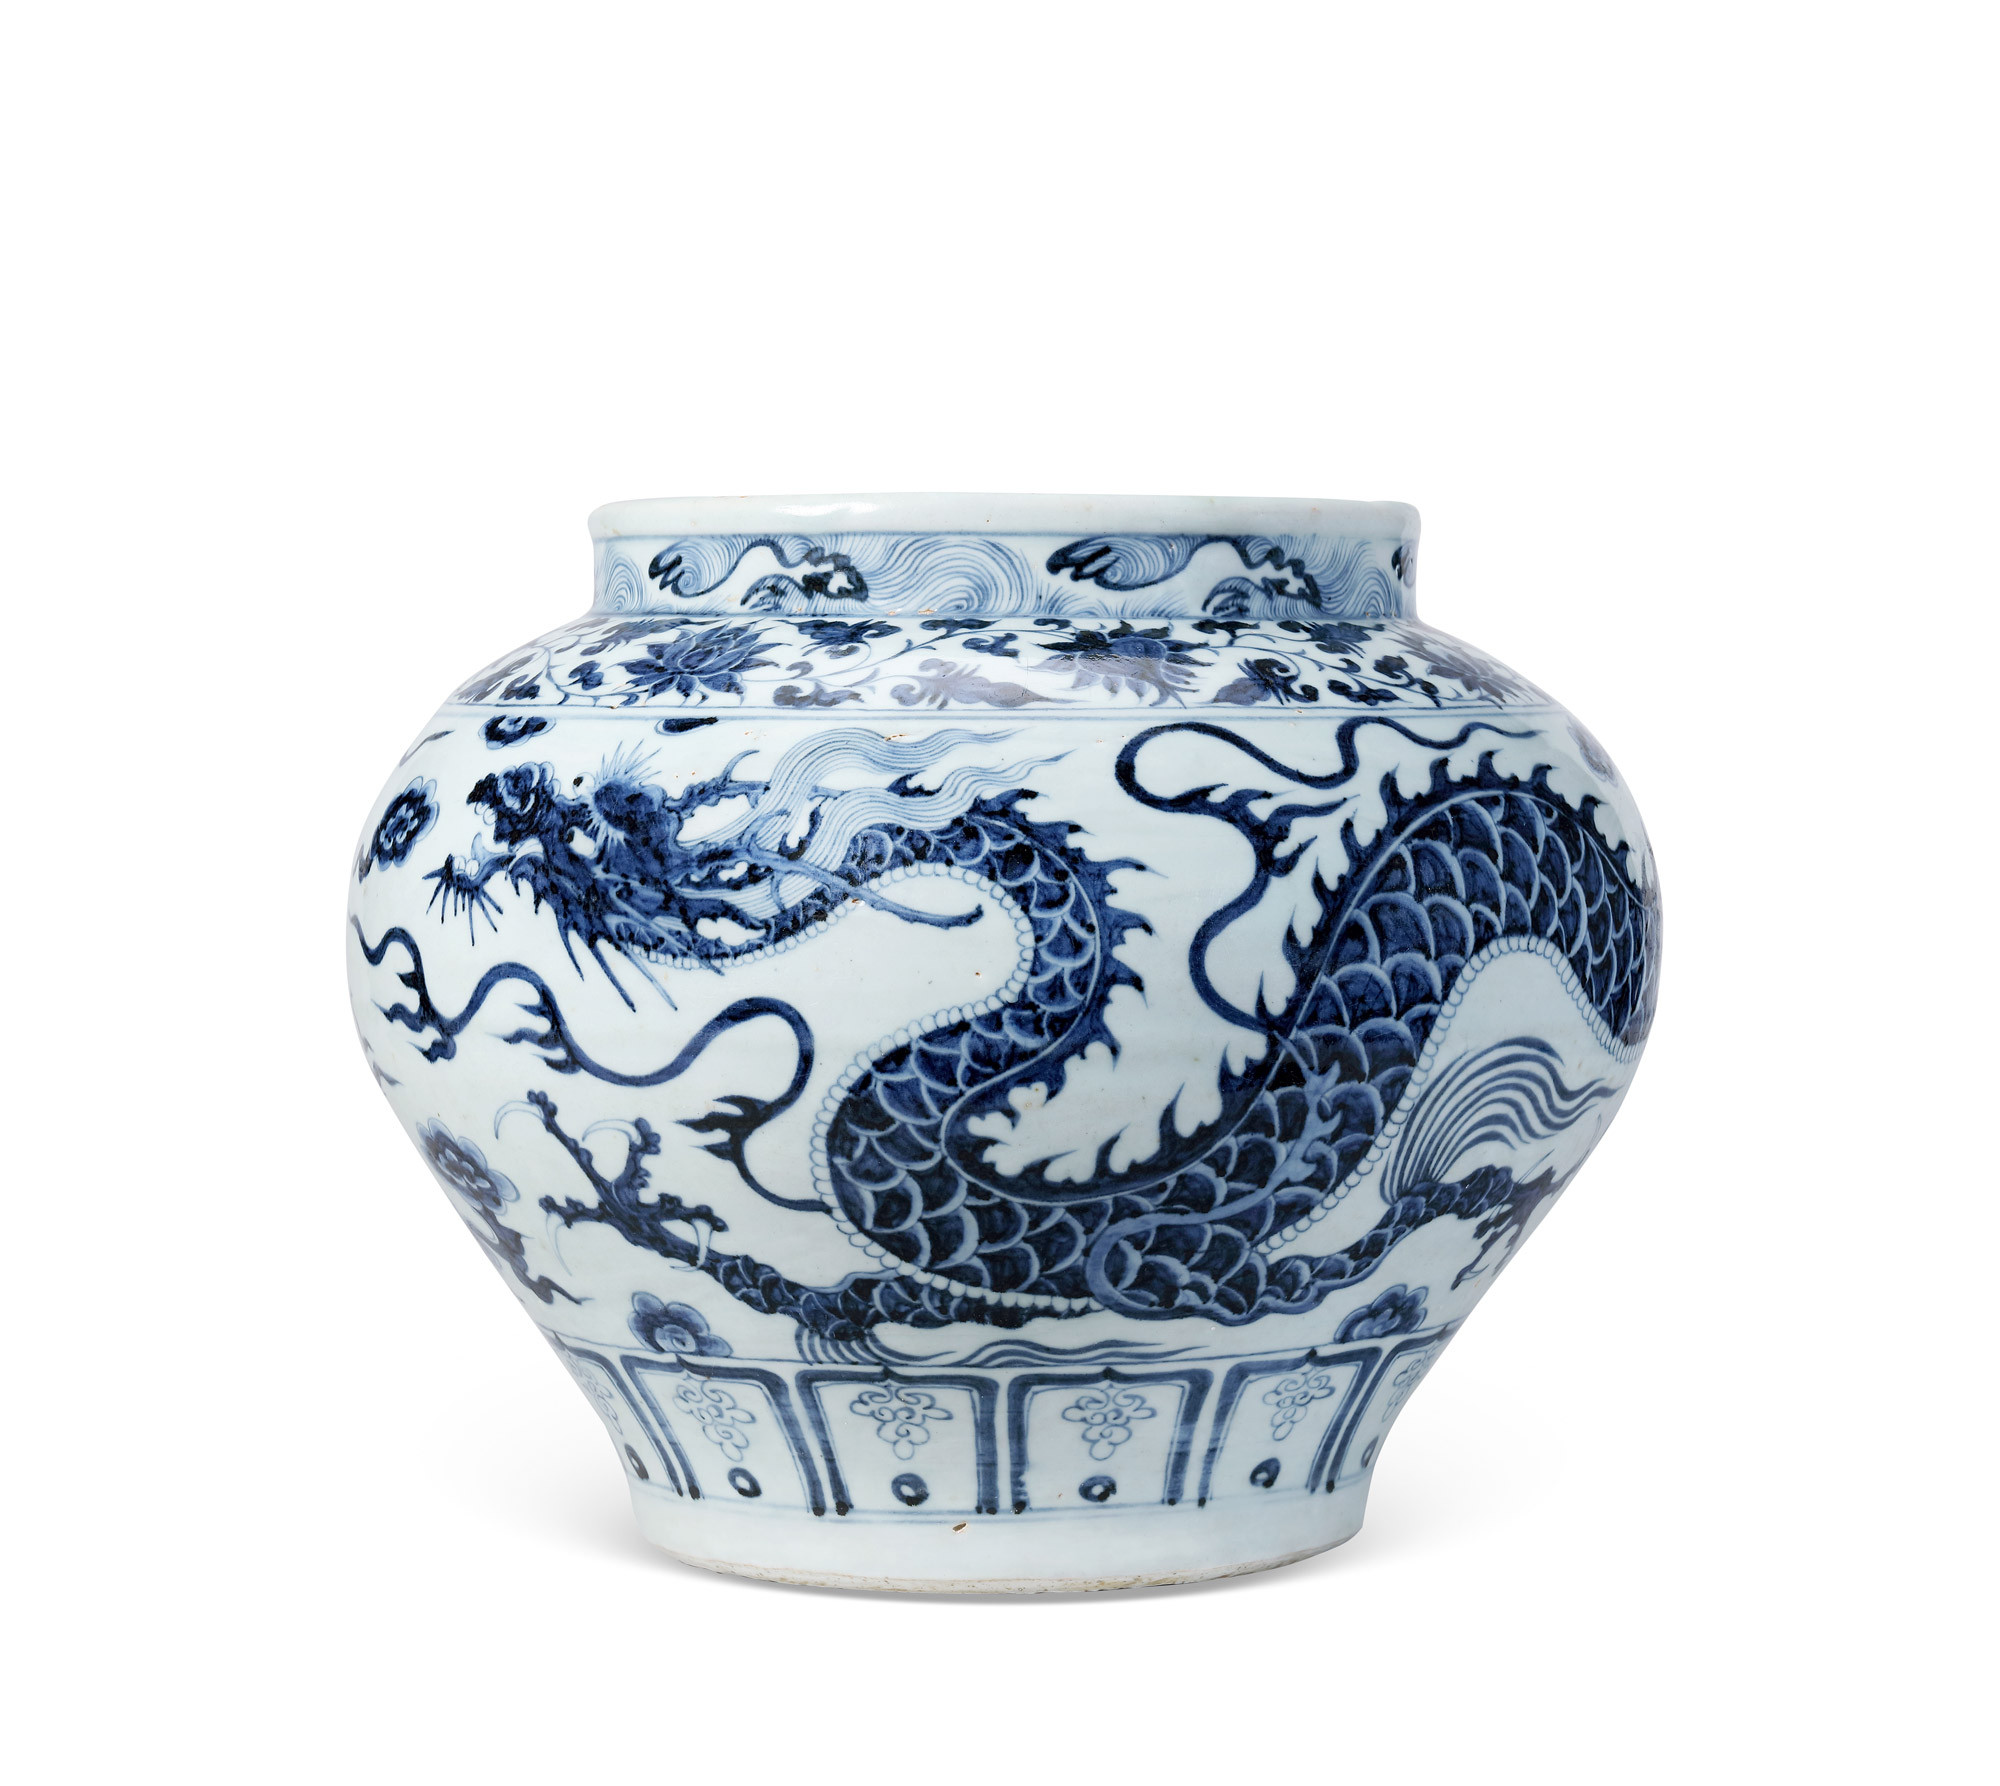 AN IMPORTANT AND RARE BLUE AND WHITE‘DRAGON AND LOTUS’JAR